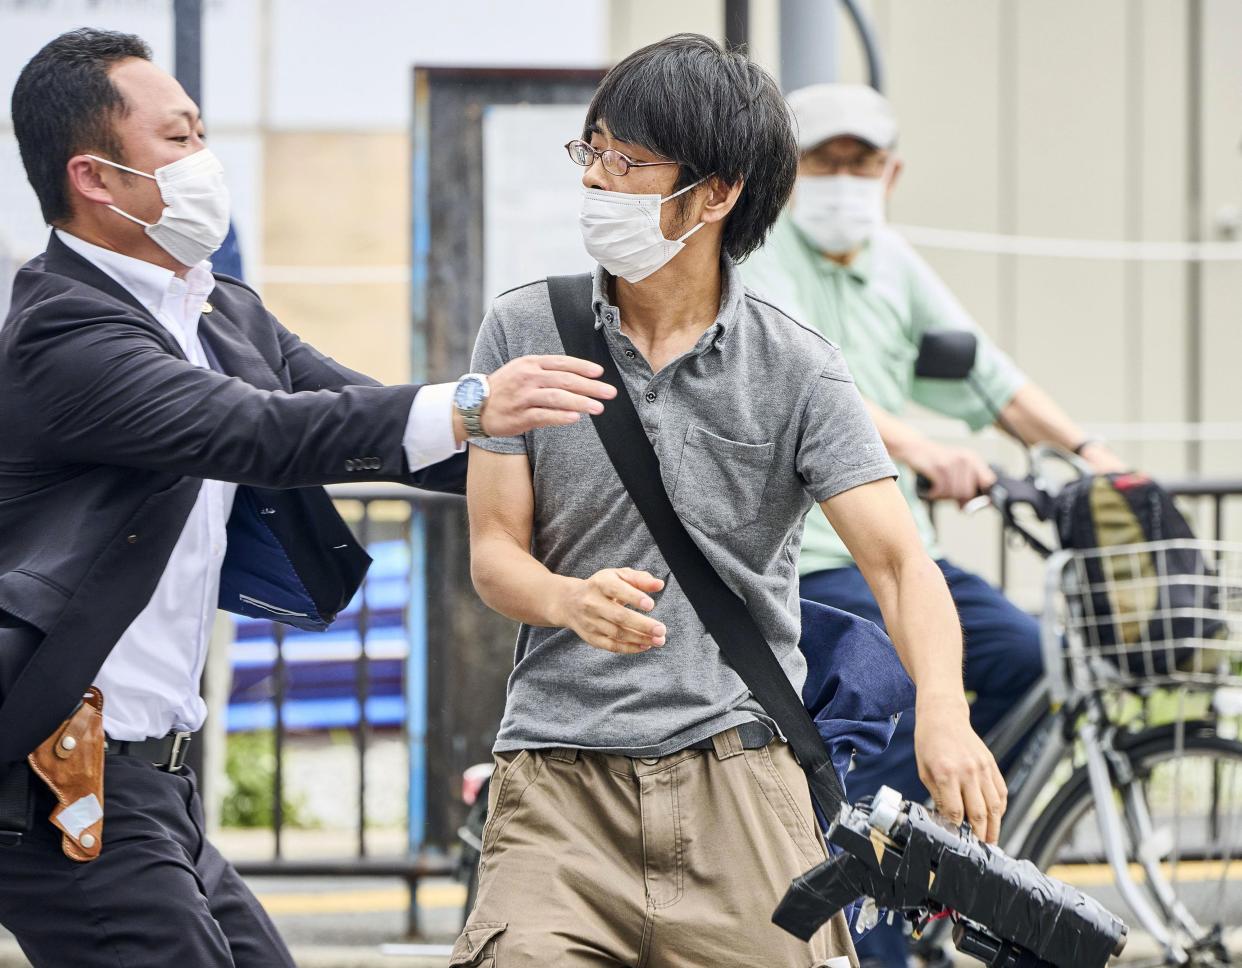 Tetsuya Yamagami, center, holding a homemade weapon, is detained near the site of gunshots in Nara, western Japan, on Friday.